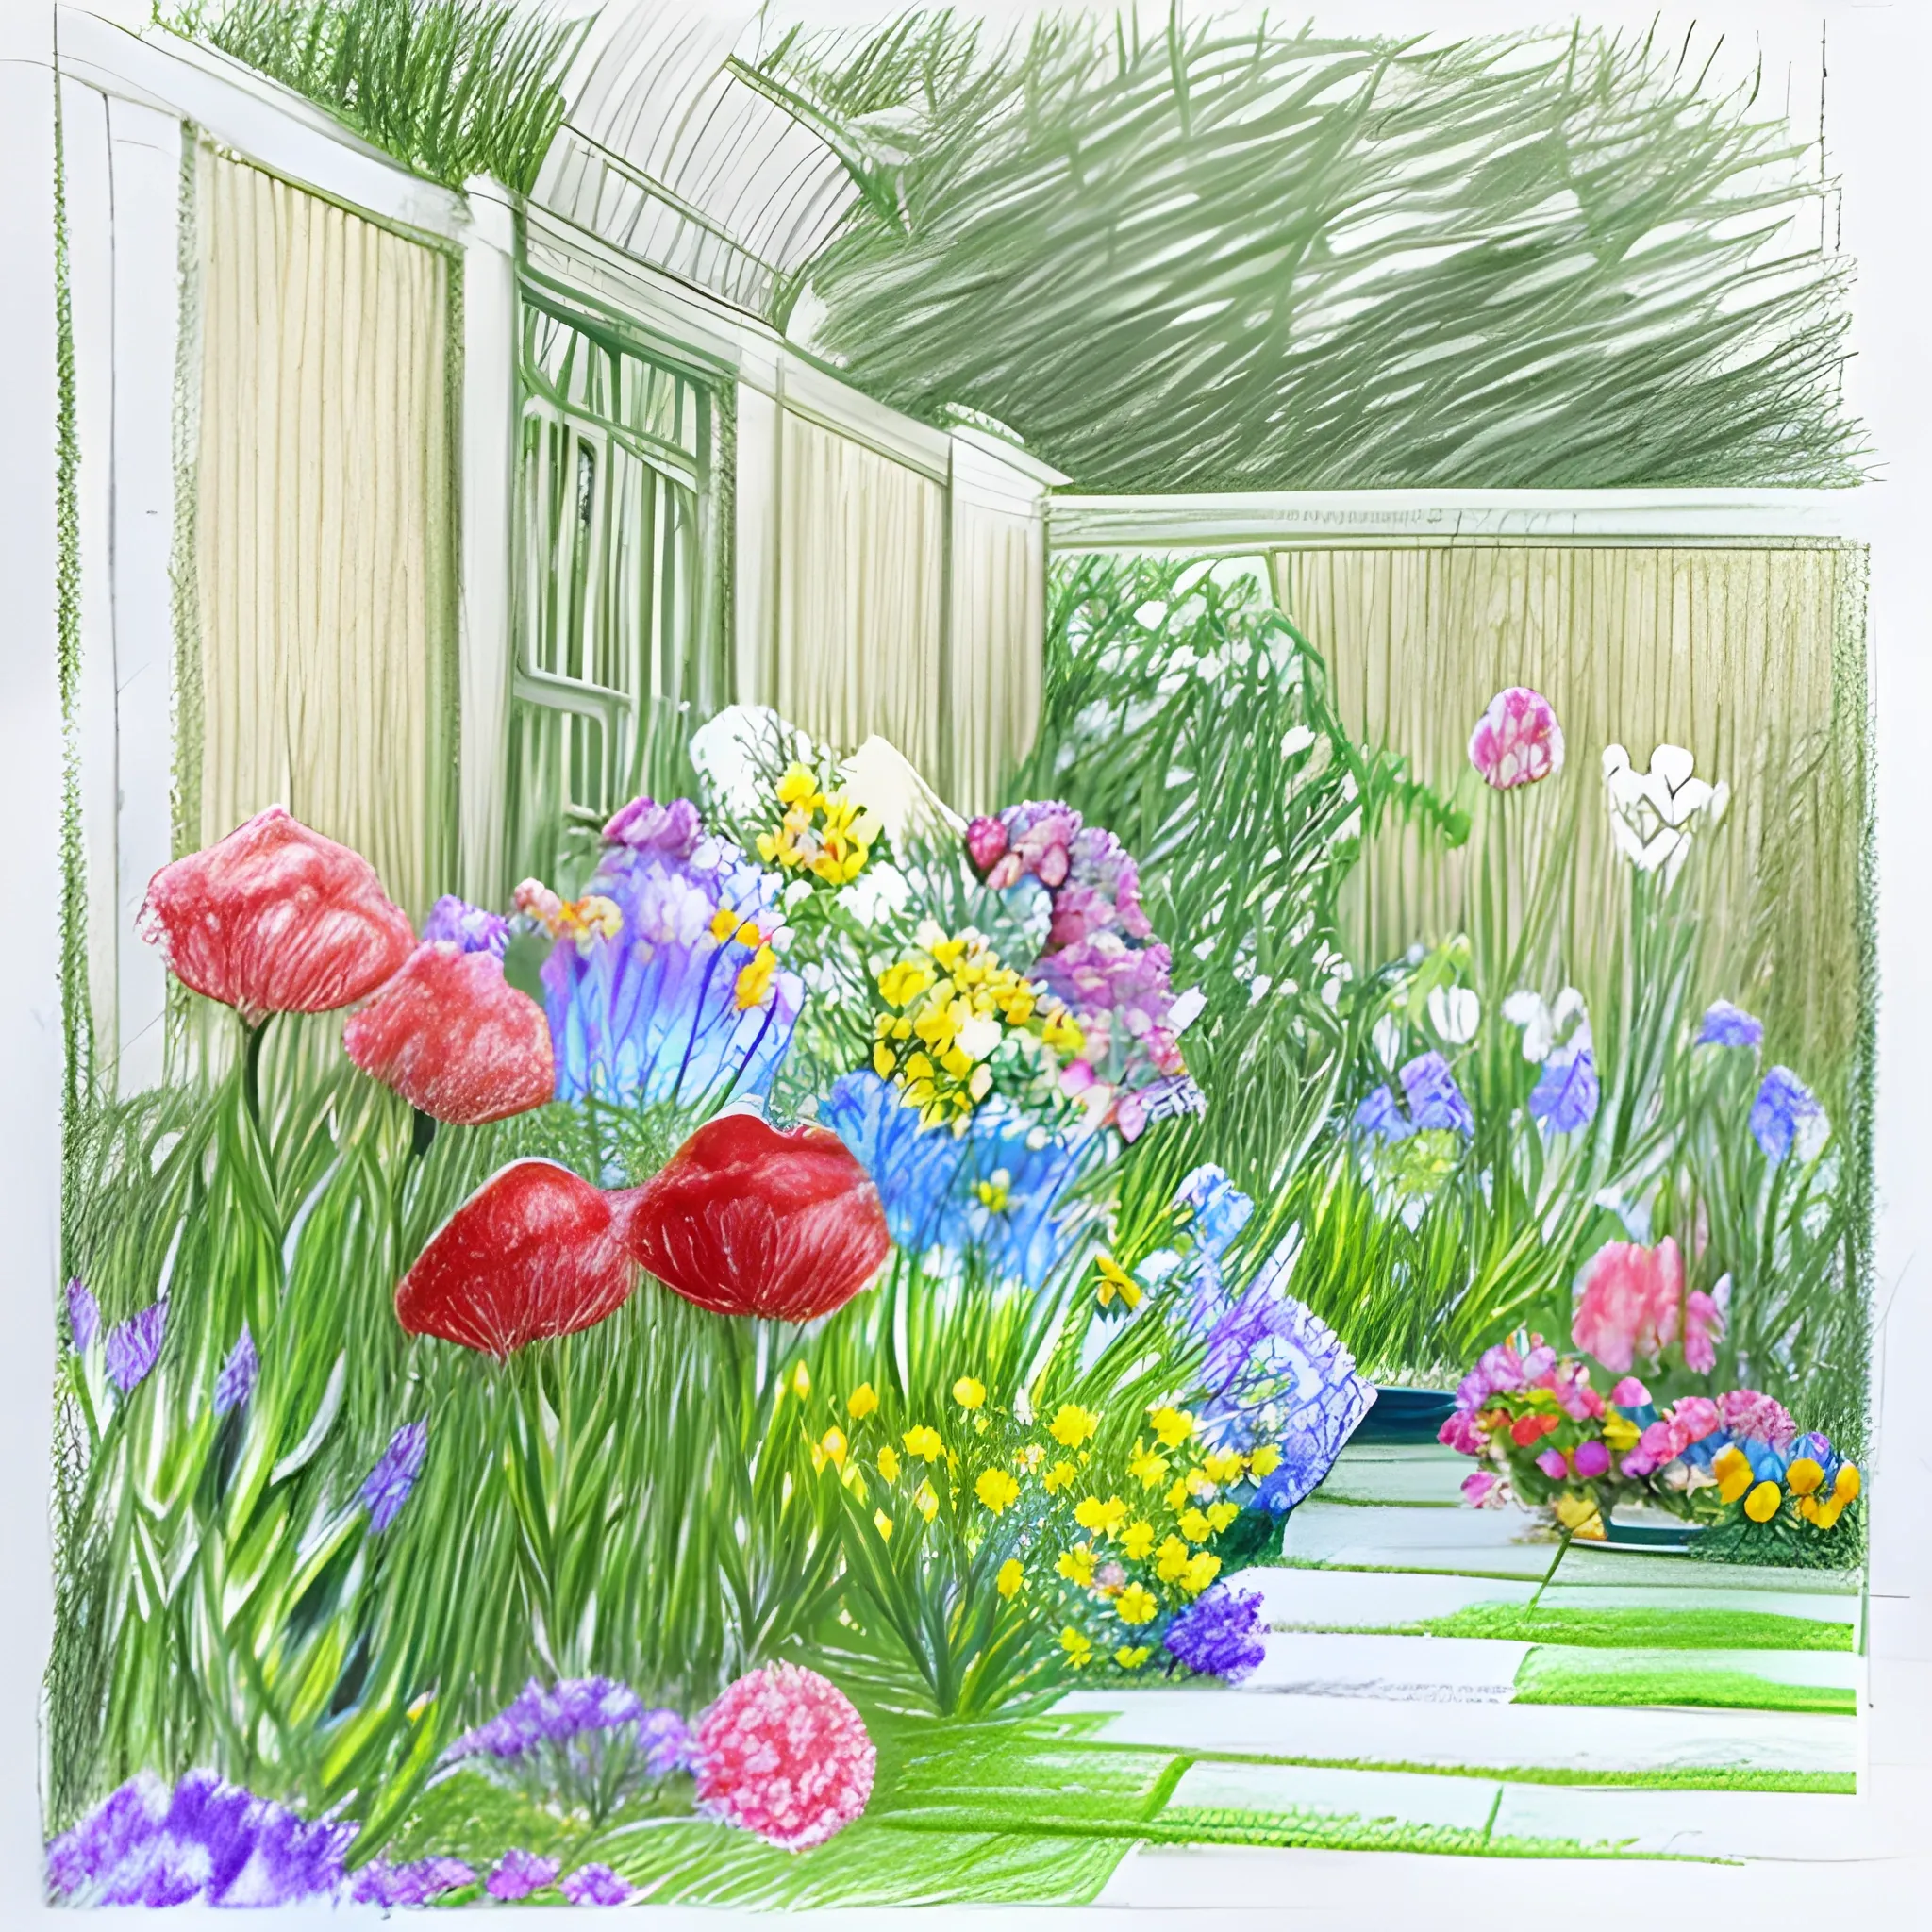 Freehand drawing of interior botanical garden Vector Image